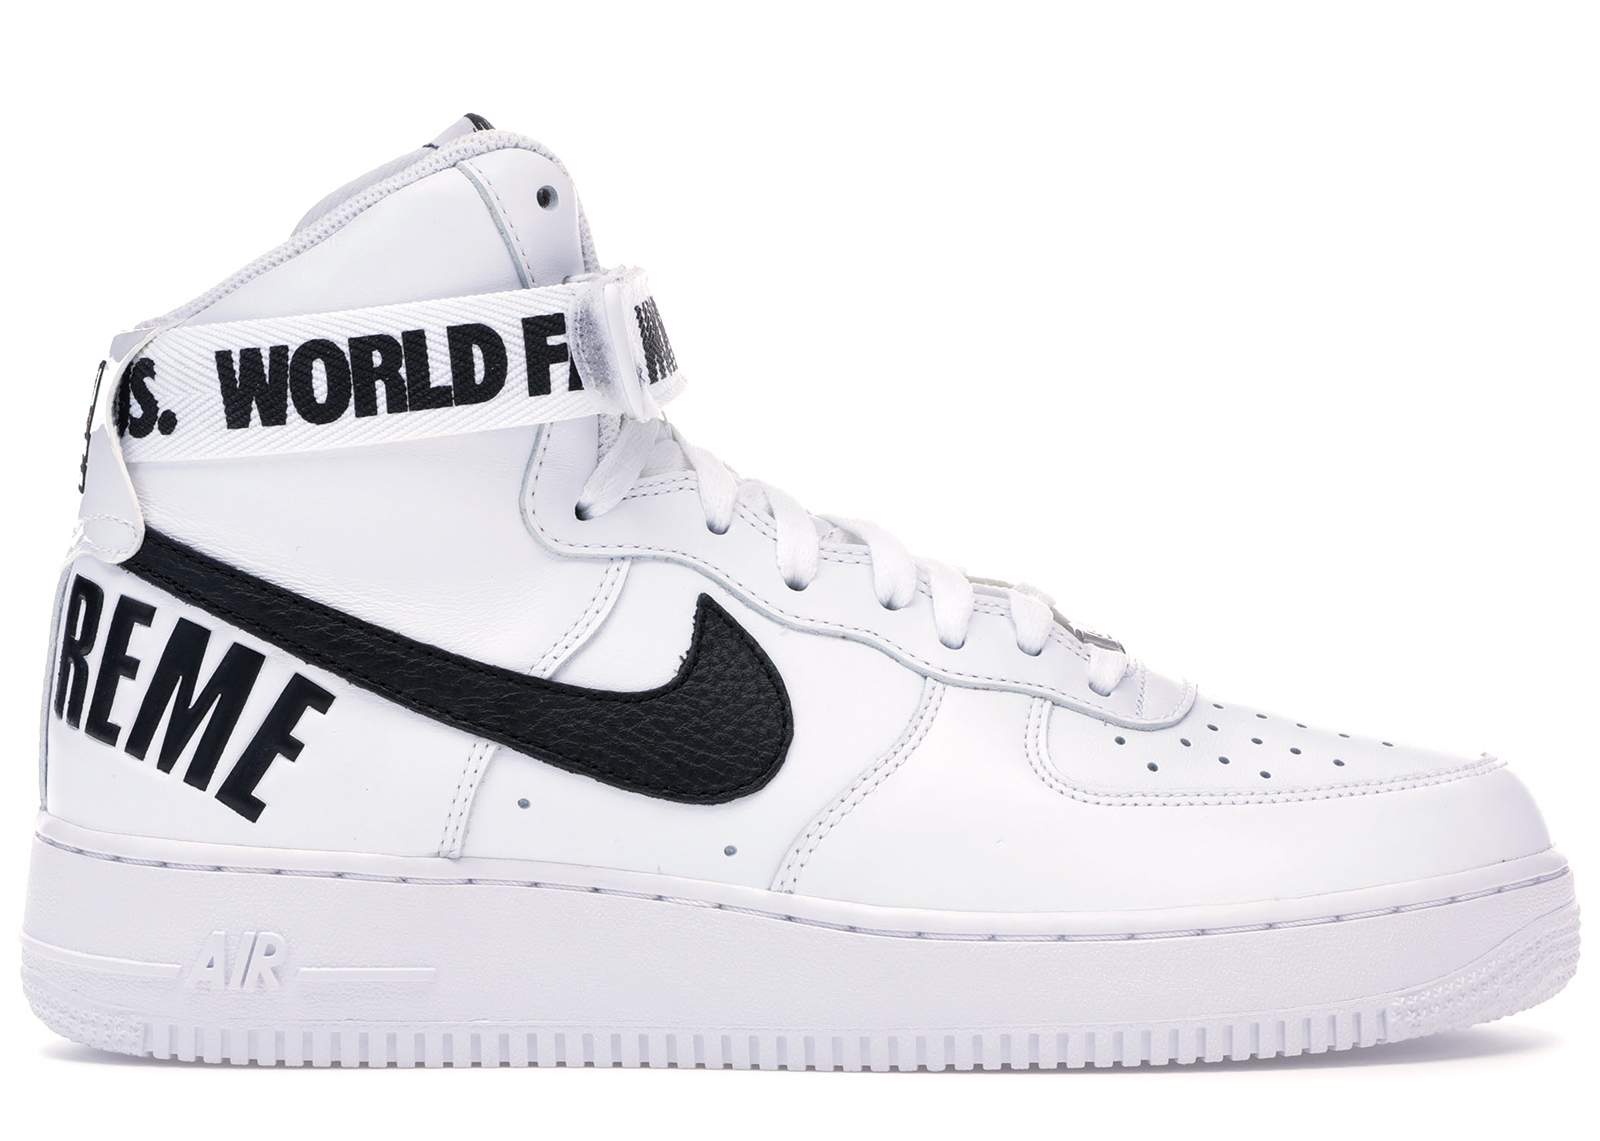 Nike Air Force 1 High Supreme World Famous White Men's - 698696 